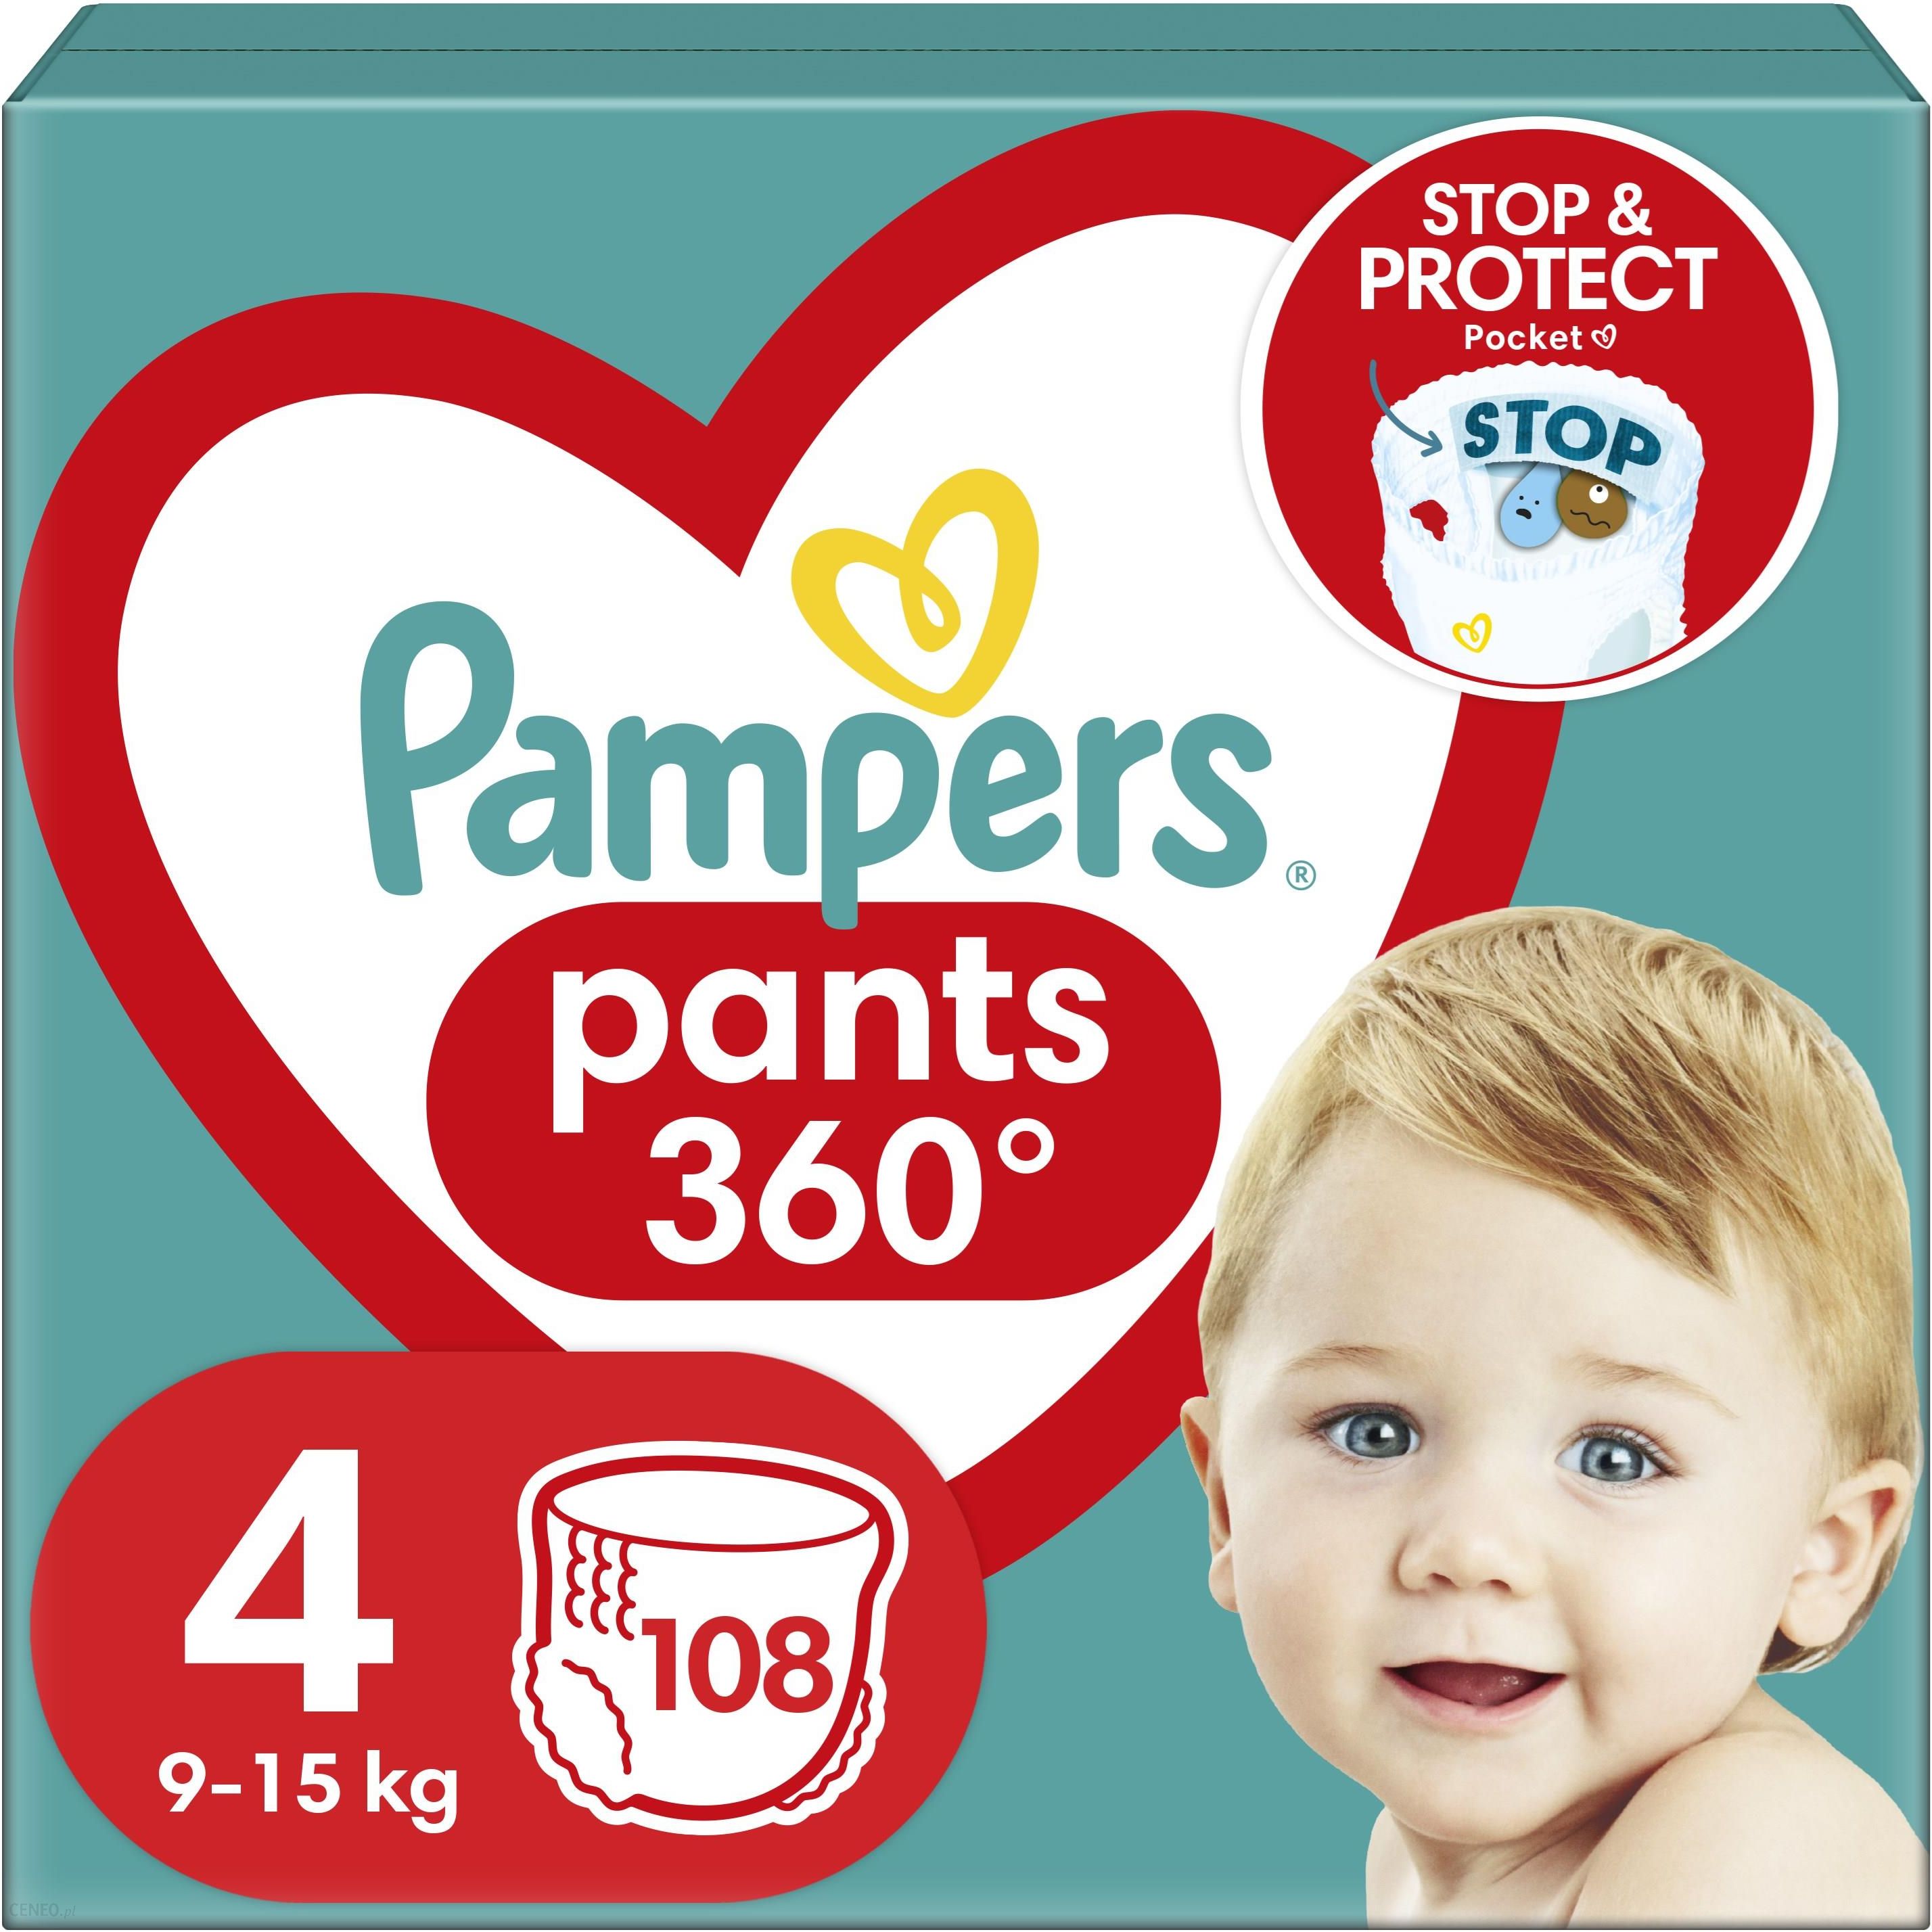 pampers active baby 5 50szt